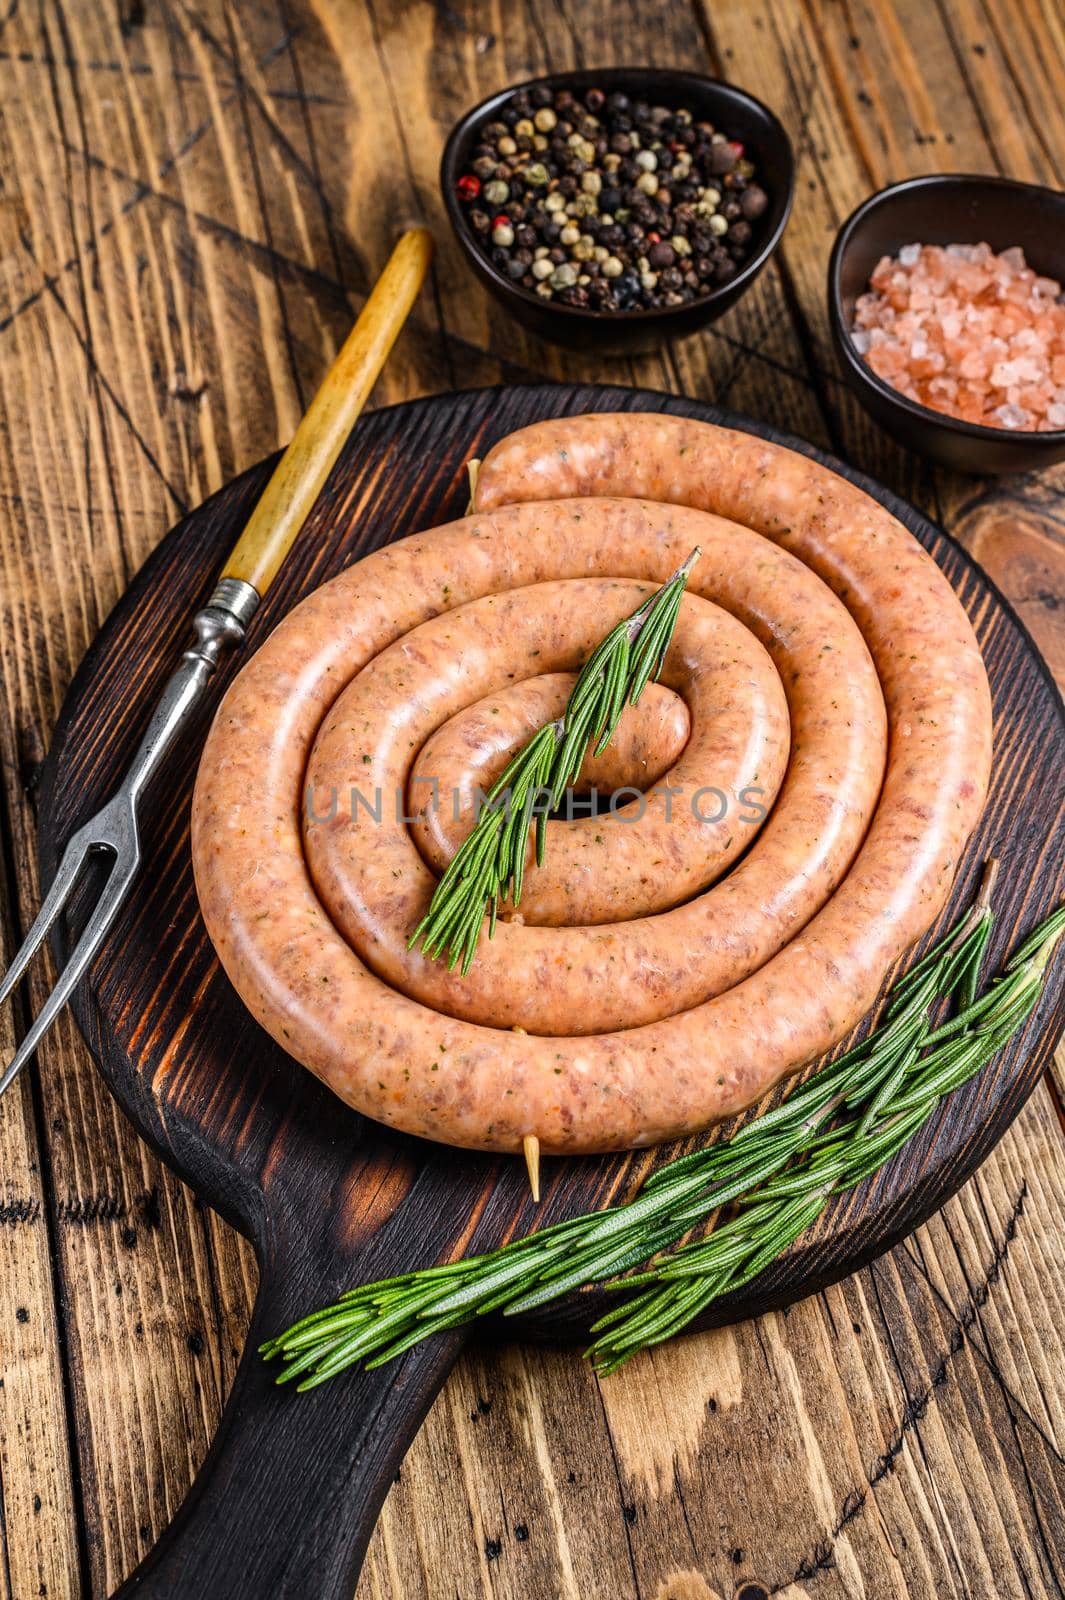 Raw spiral barbecue sausage from pork and beef ground meat. Wooden background. Top view by Composter